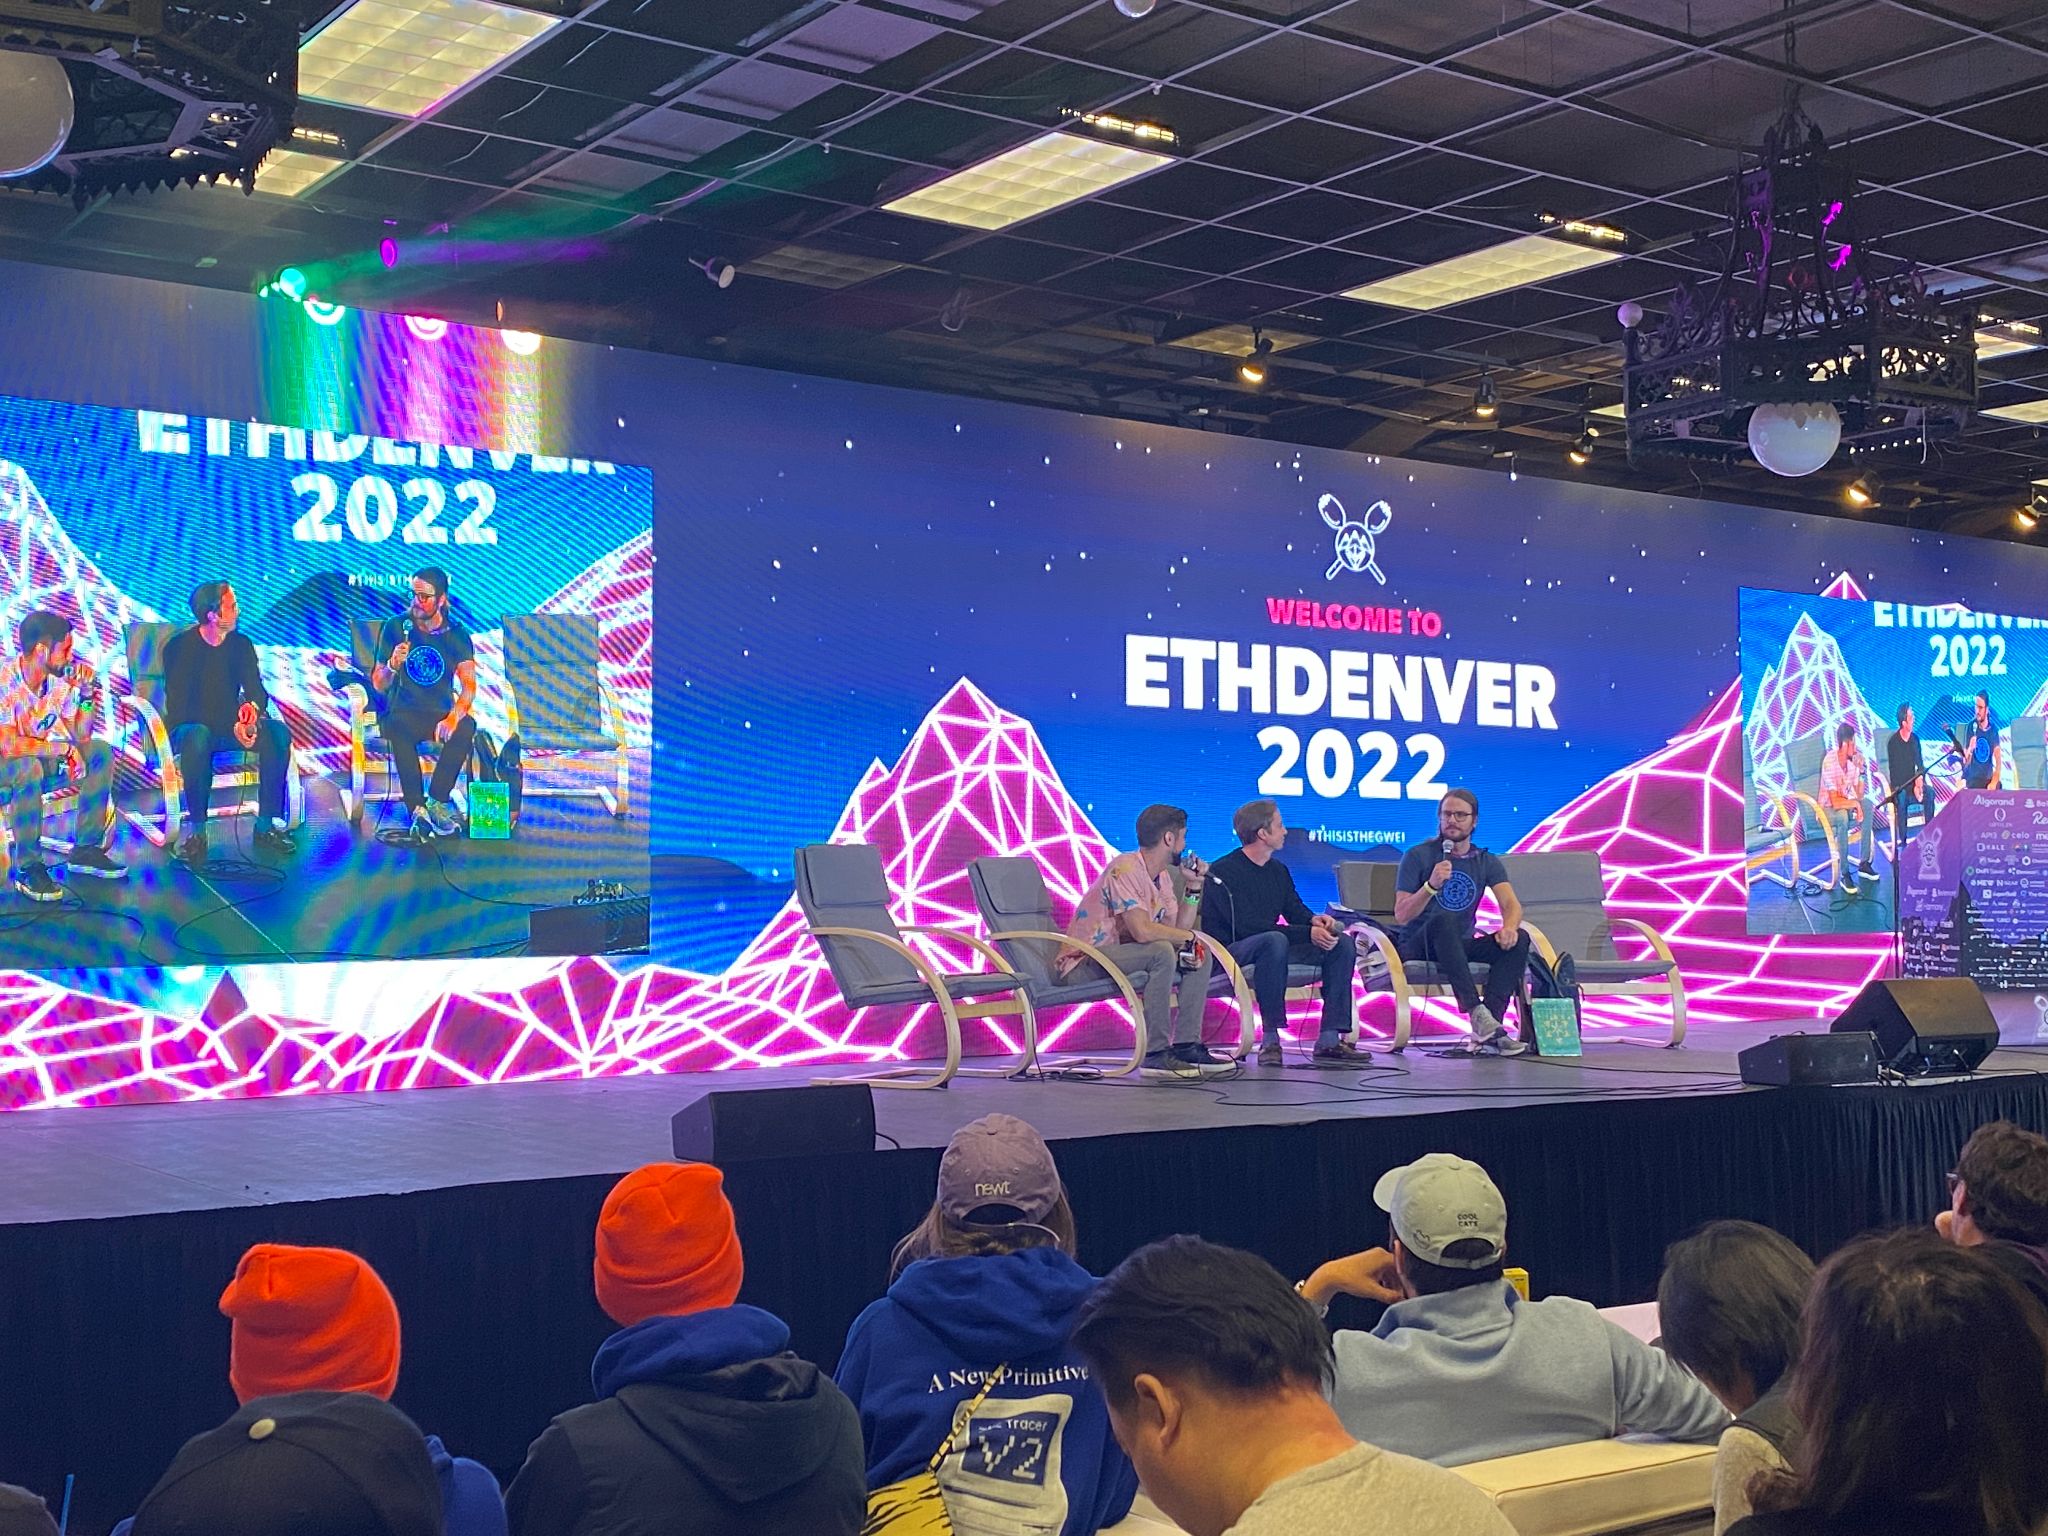 What Happened Today at ETHDenver 2022